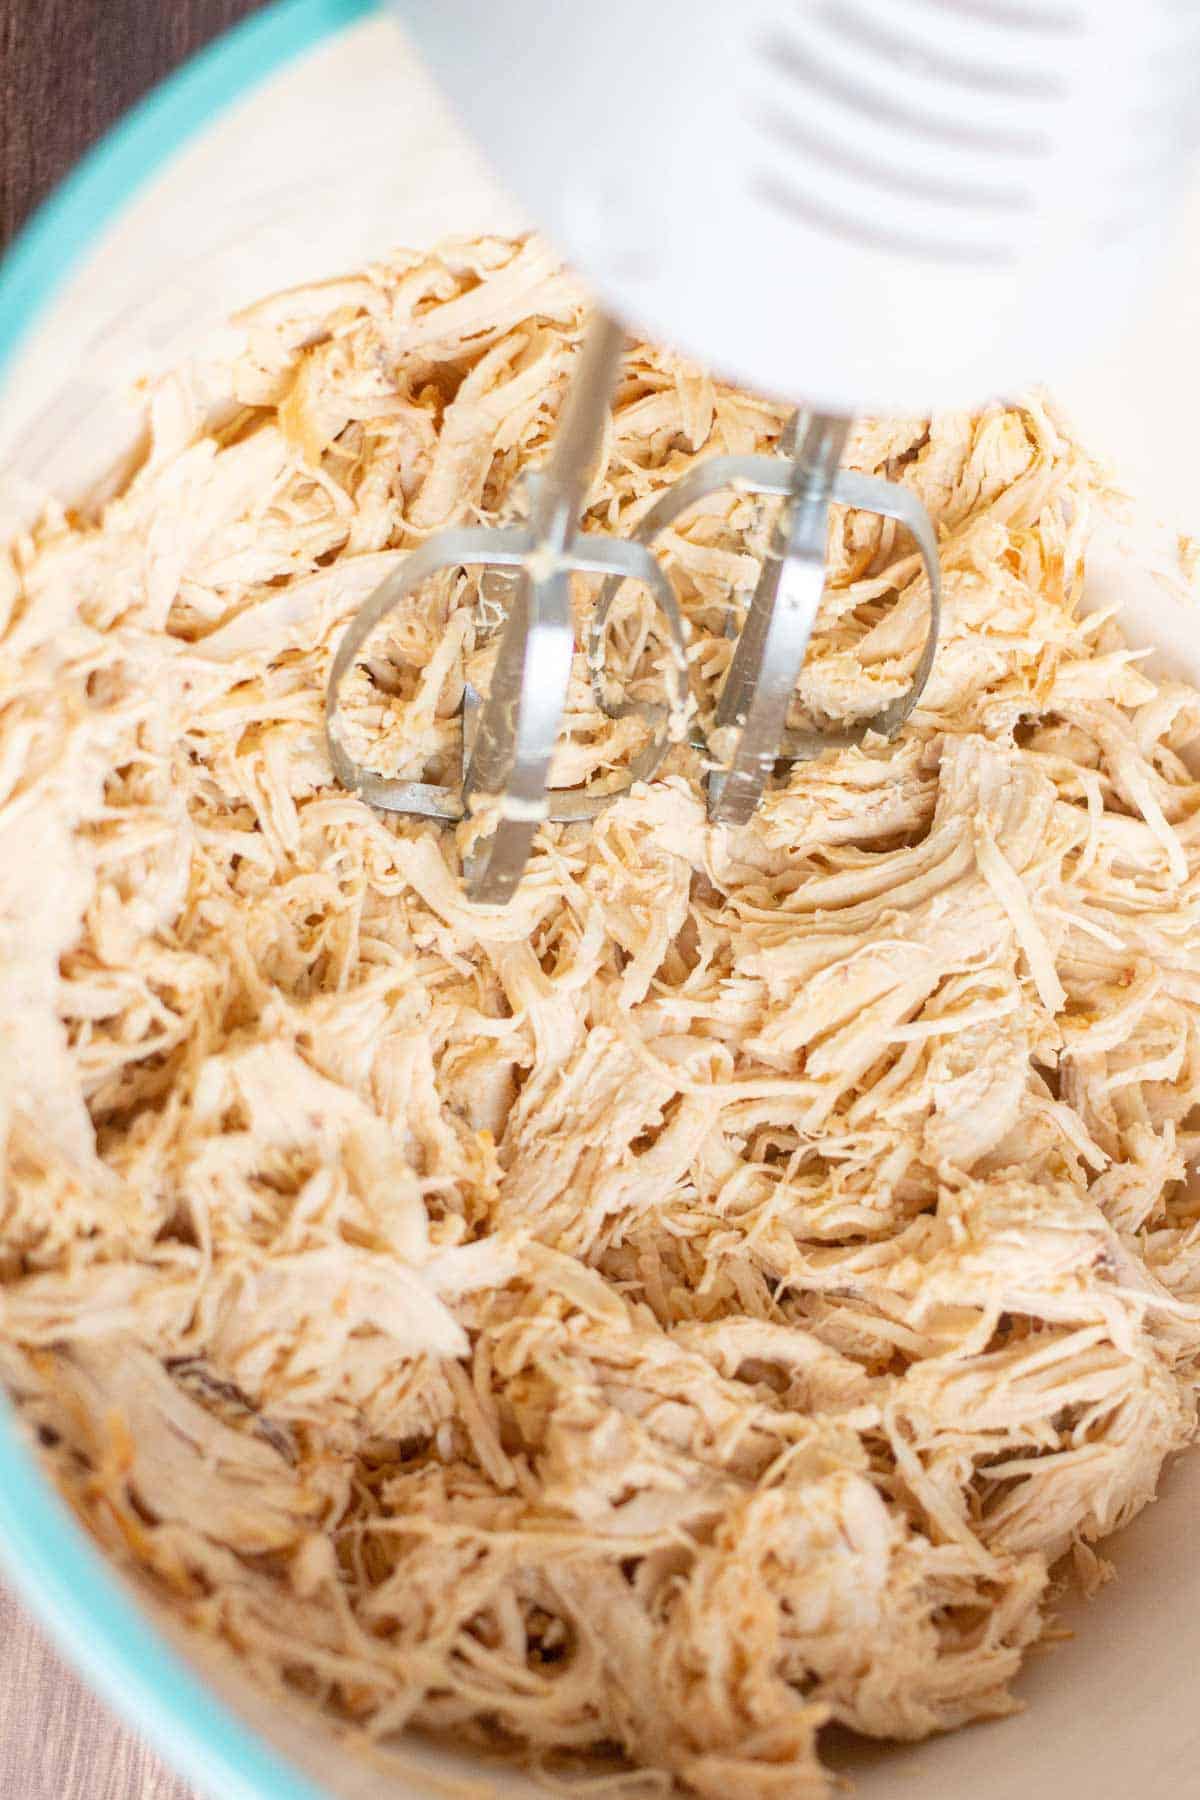 Large bowl of shredded chicken. A hand mixer is being used to shred the chicken.